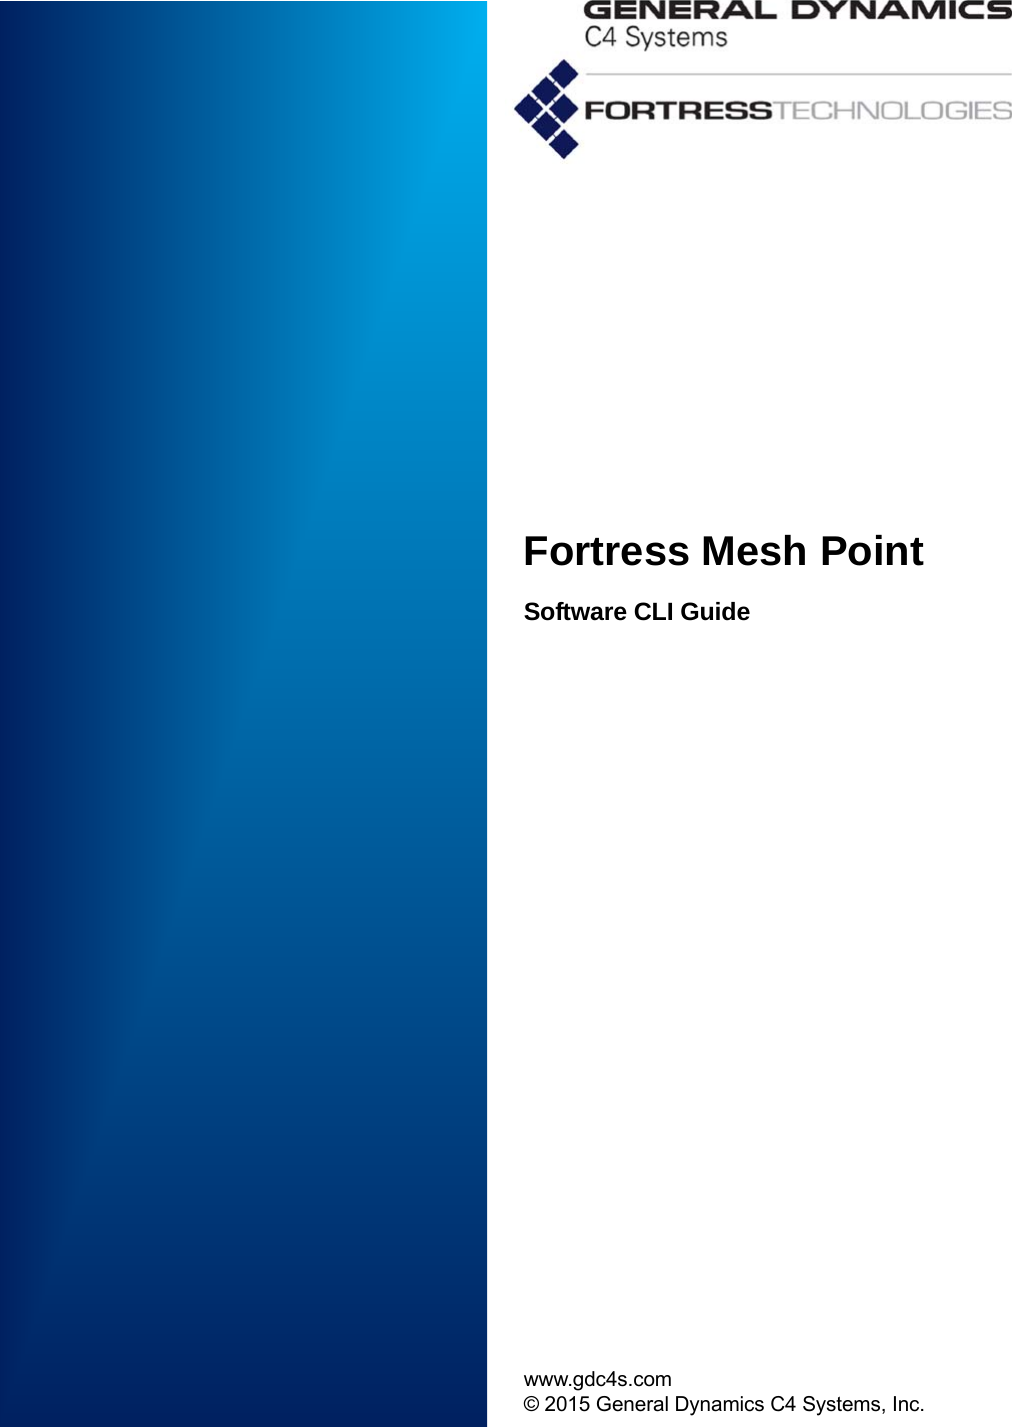 Fortress Mesh PointSoftware CLI Guidewww.gdc4s.com© 2015 General Dynamics C4 Systems, Inc.